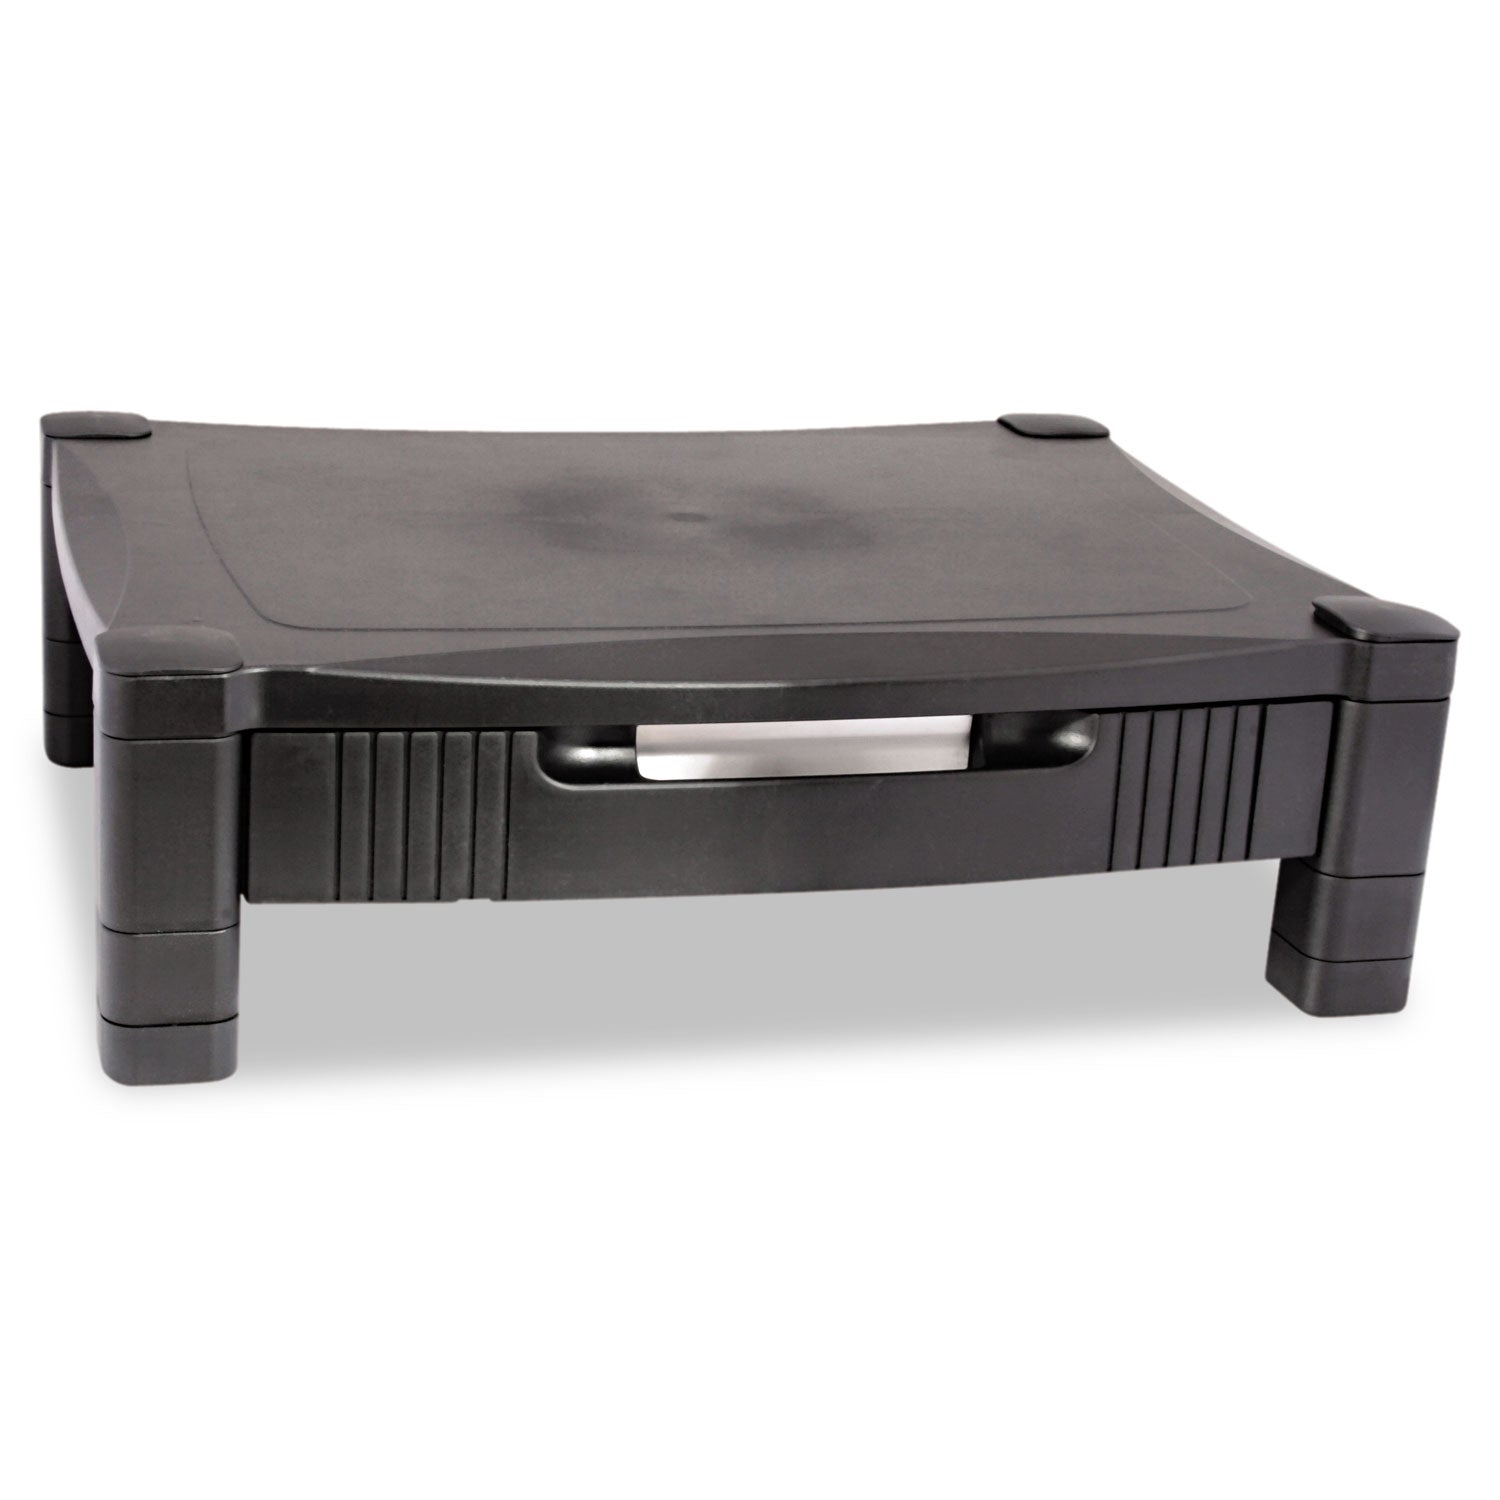 Monitor Stand with Drawer, 17" x 13.25" x 3" to 6.5", Black, Supports 50 lbs - 